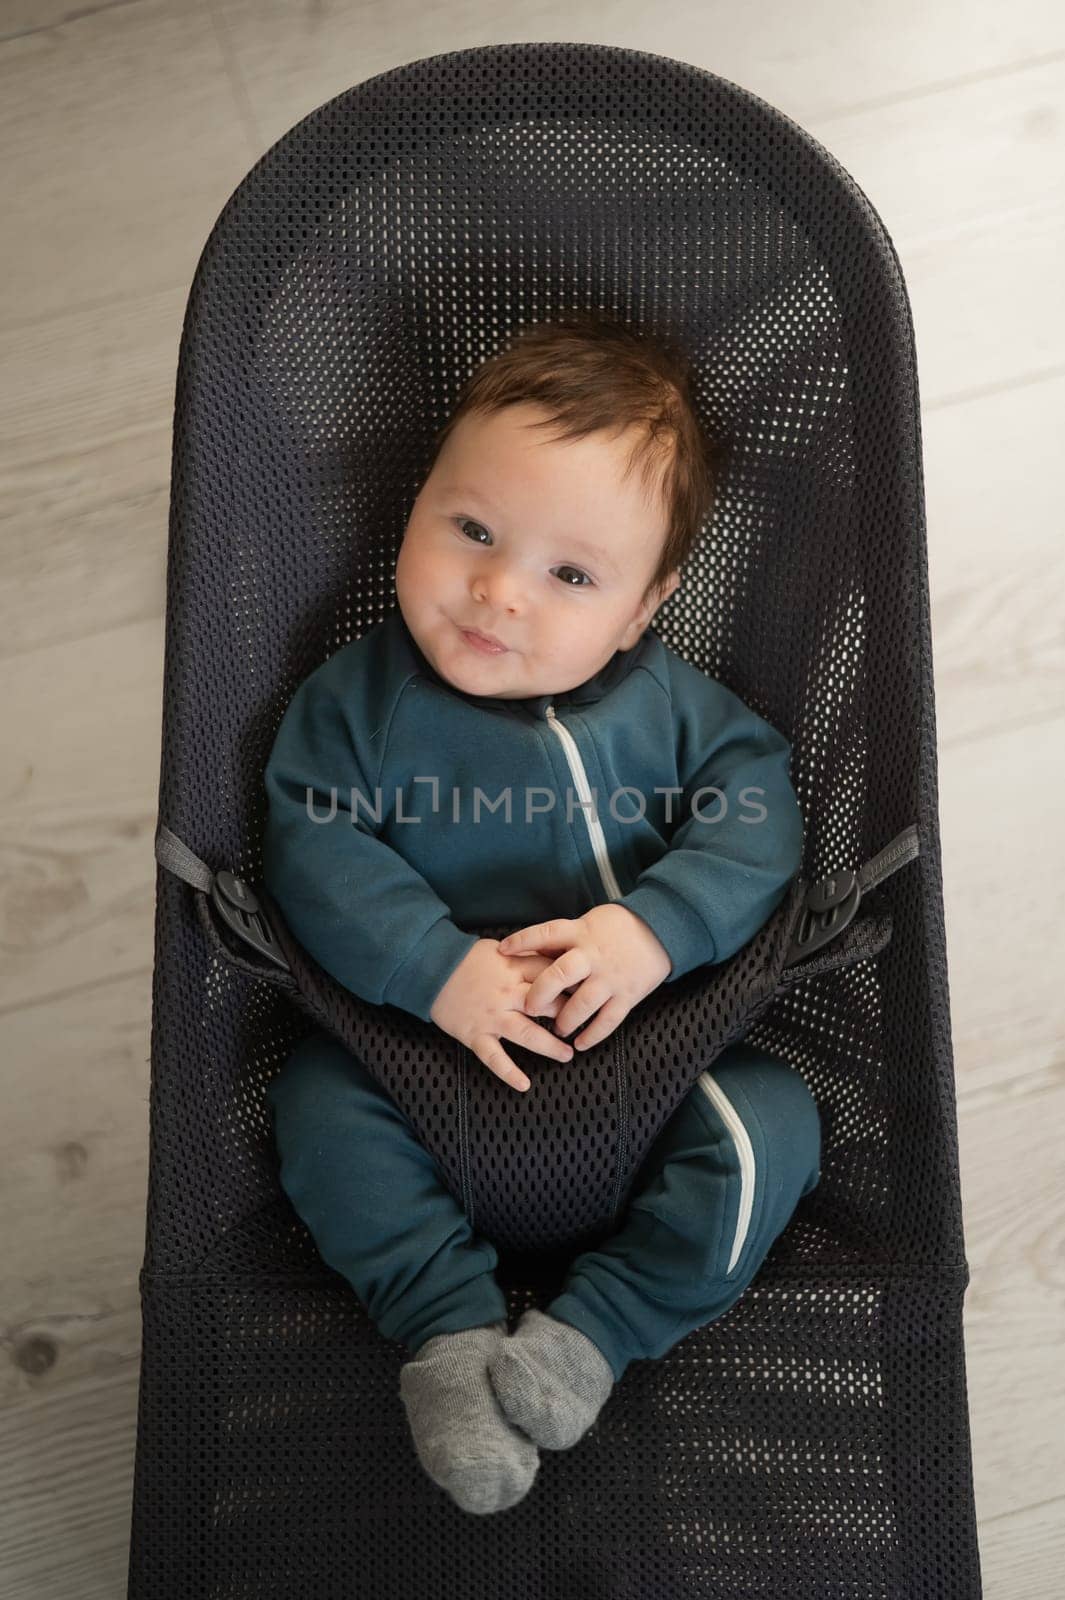 Cute newborn baby dressed in blue overalls sitting in a baby lounger. Vertical photo